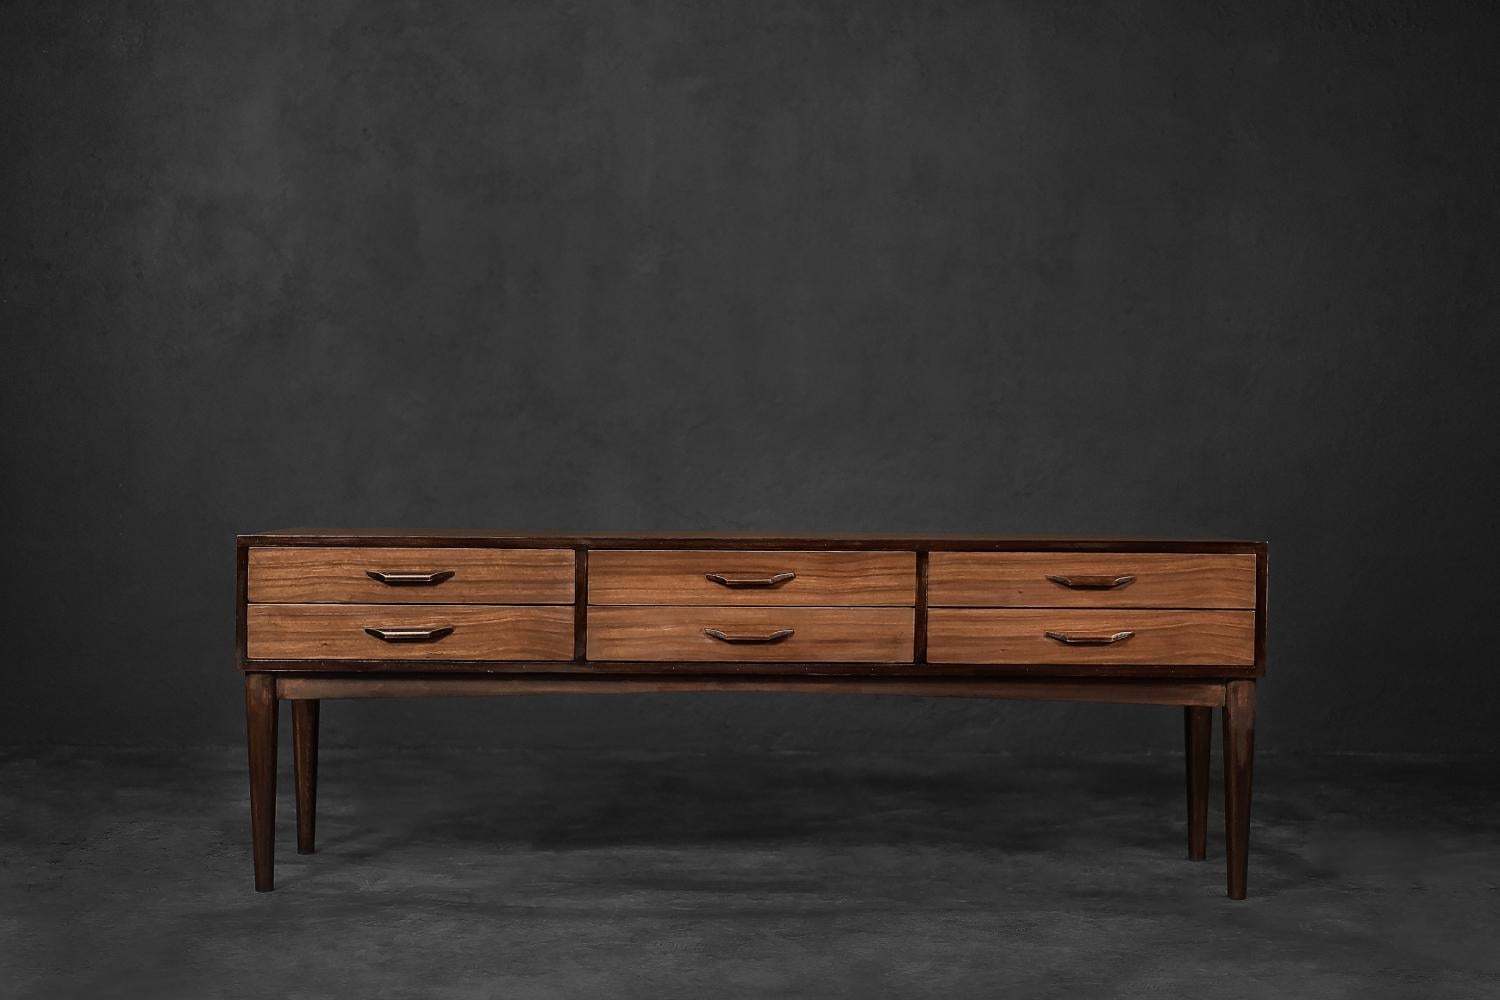 Vintage Low Mid-Century Danish Modern Mahogany Sideboard with Drawers, 1970s In Good Condition For Sale In Warszawa, Mazowieckie